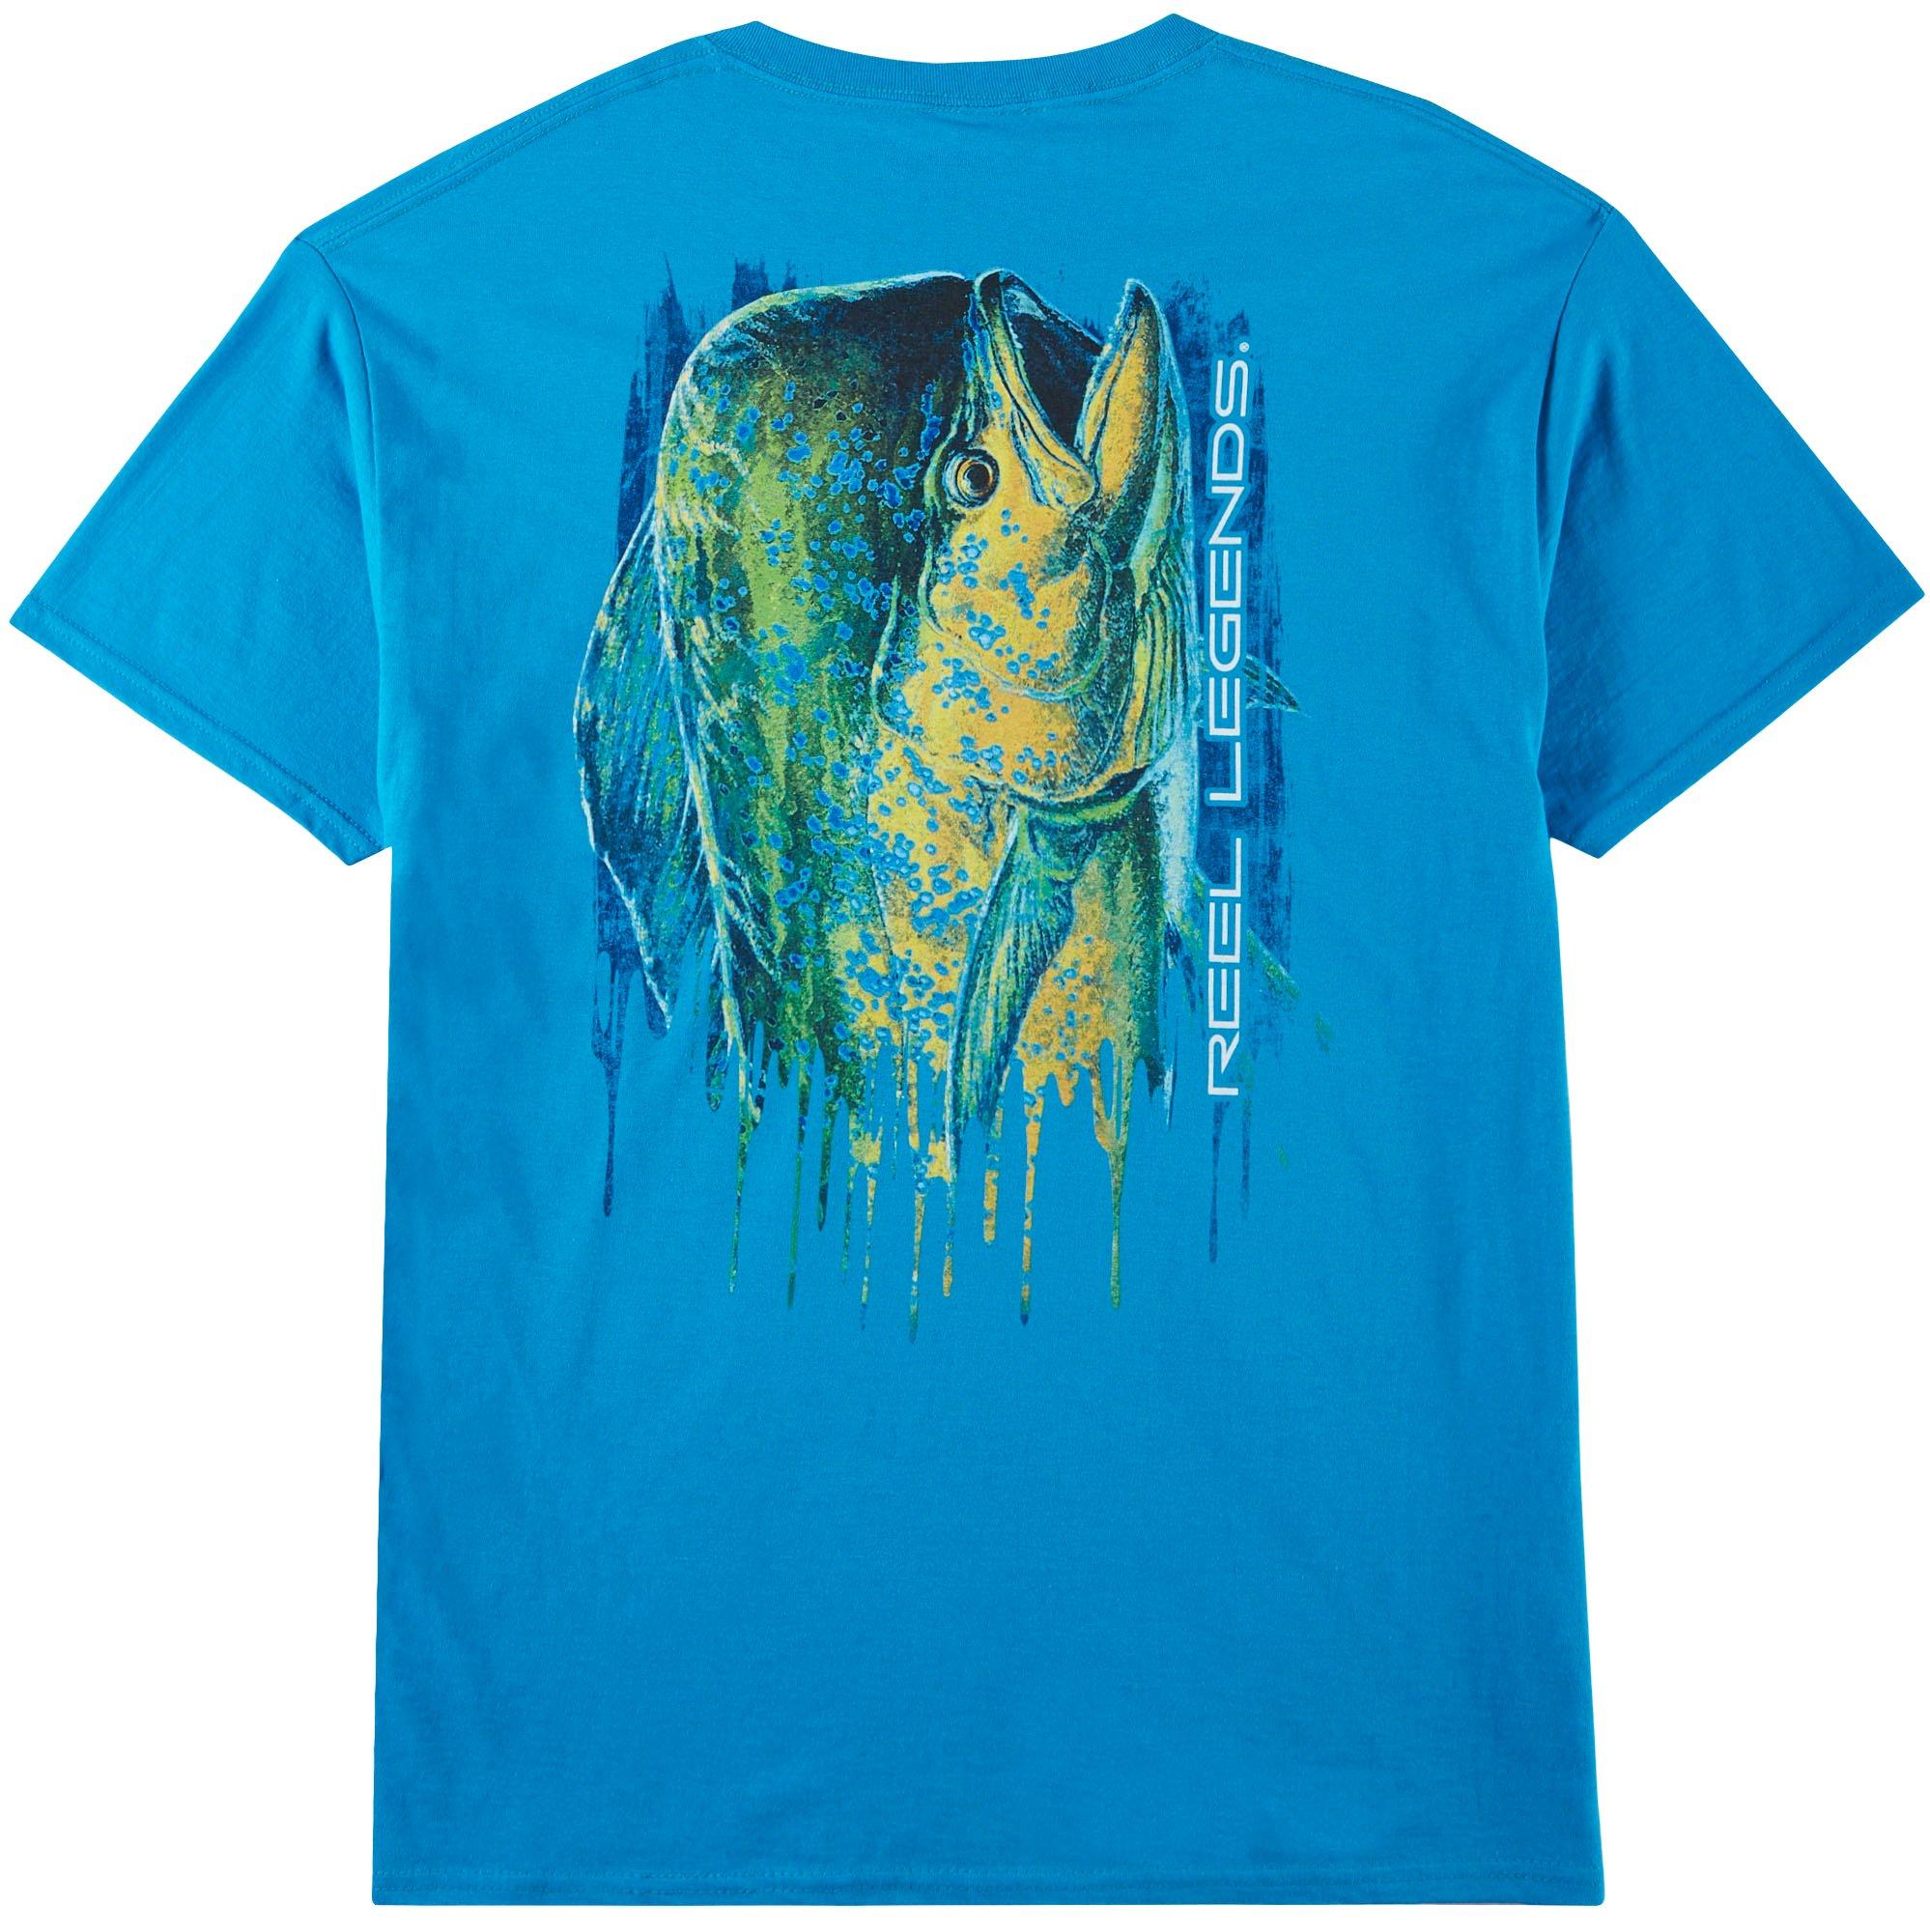 T-shirt, Reel Legends, Blue, Small for Sale in Inverness, Florida